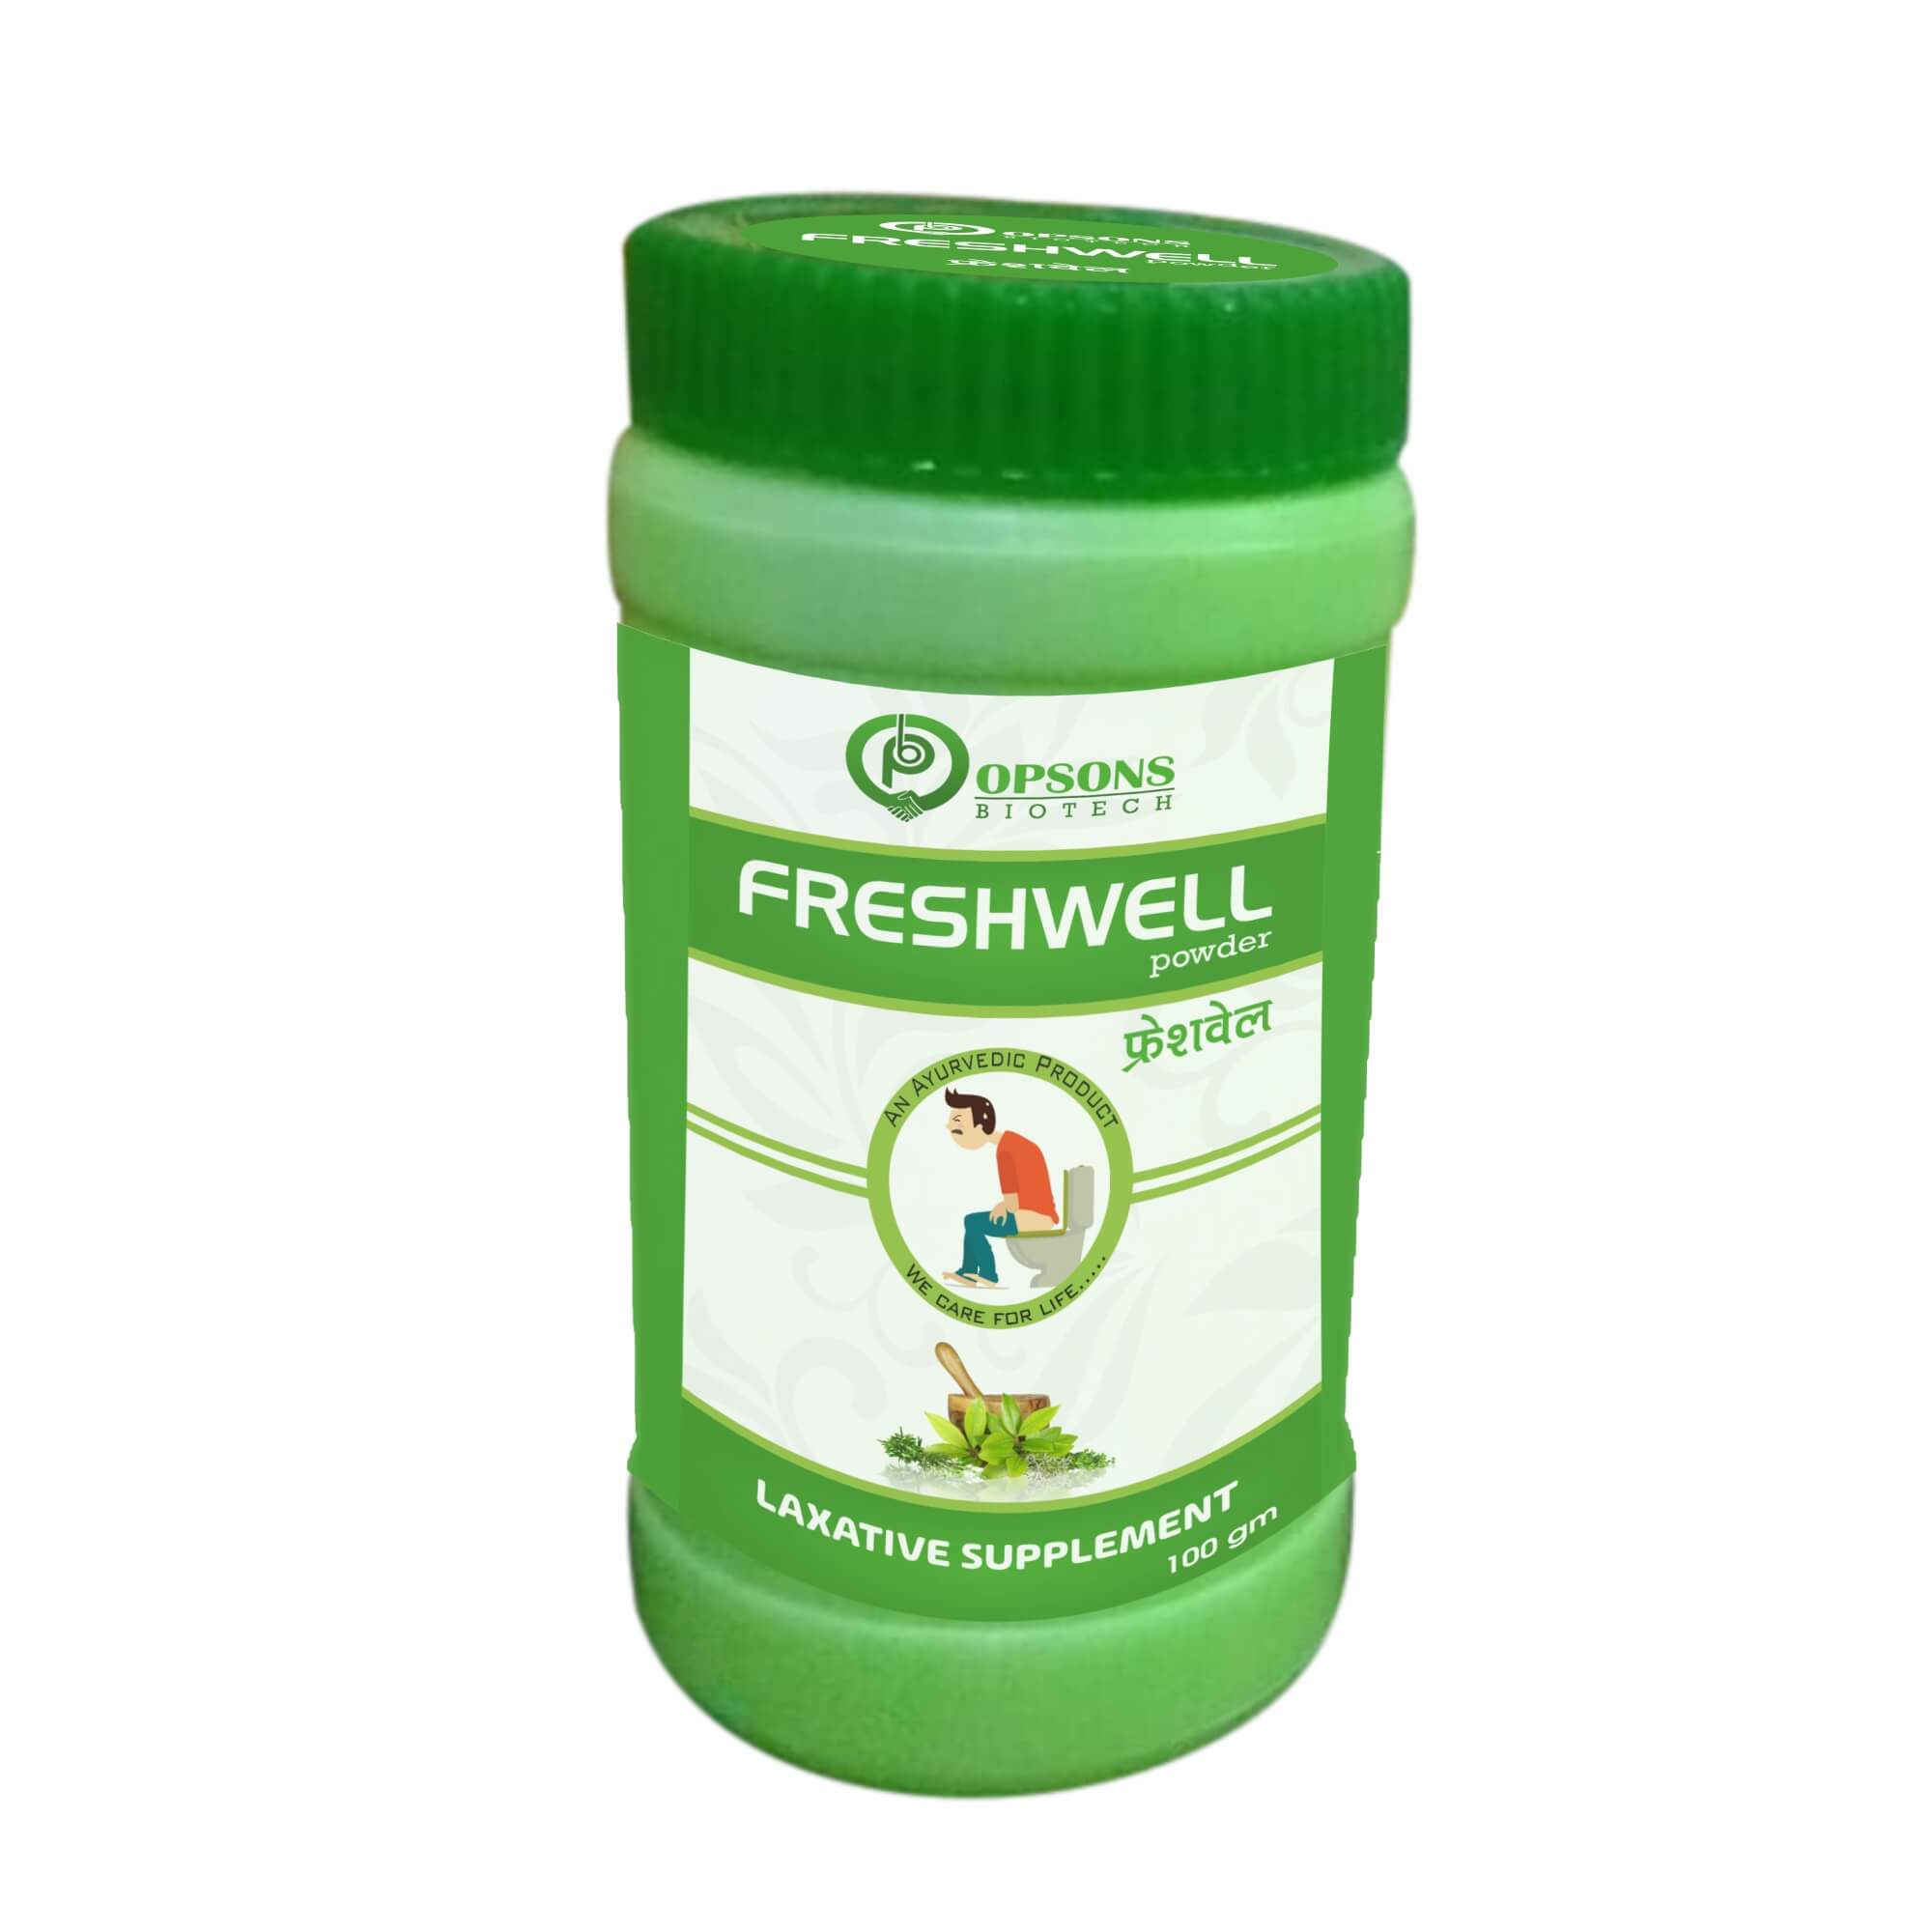 Product Name: Freshwell, Compositions of Freshwell are Laxative Supplement - Opsons Biotech